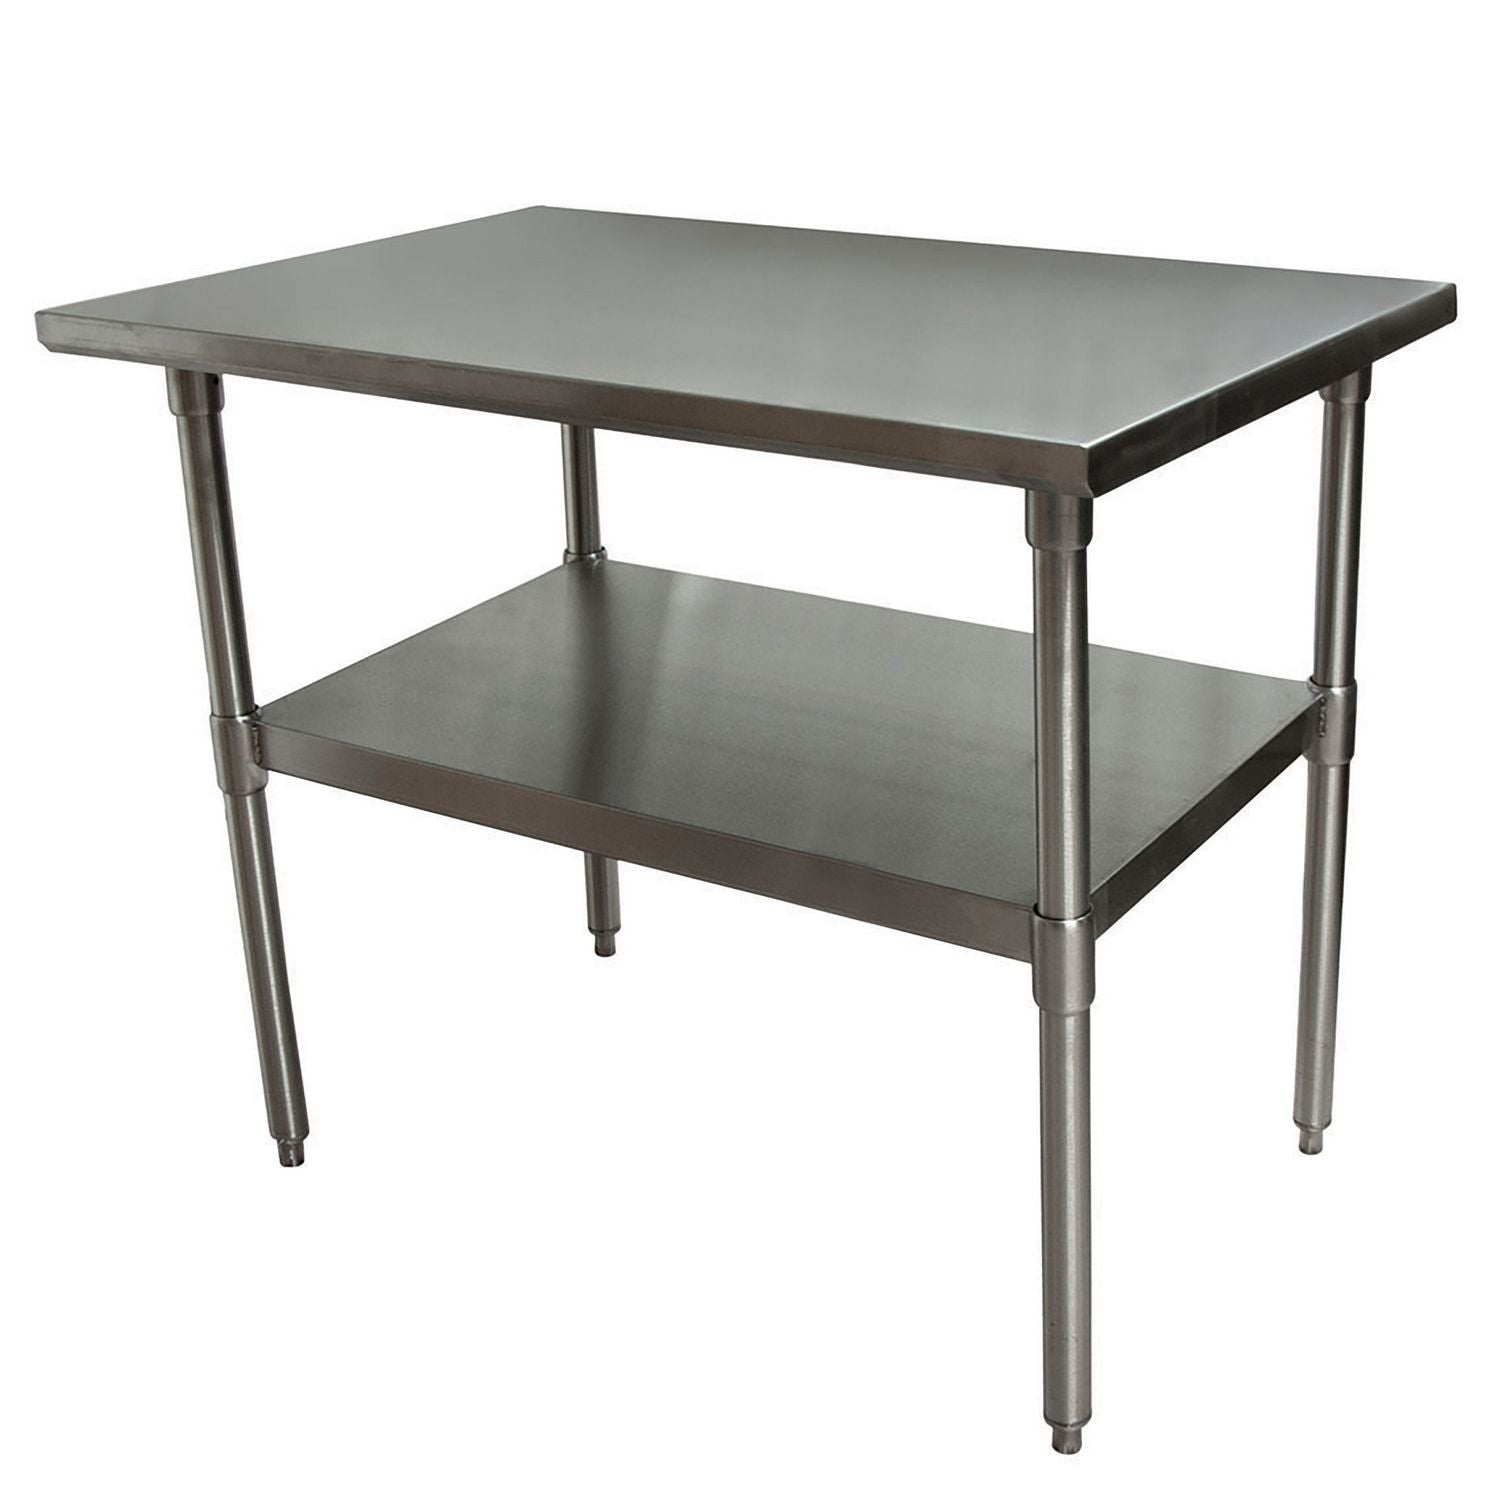 Stainless Steel Flat Top Work Tables, 48w x 24d x 36h, Silver, 2/Pallet, Ships in 4-6 Business Days - 8